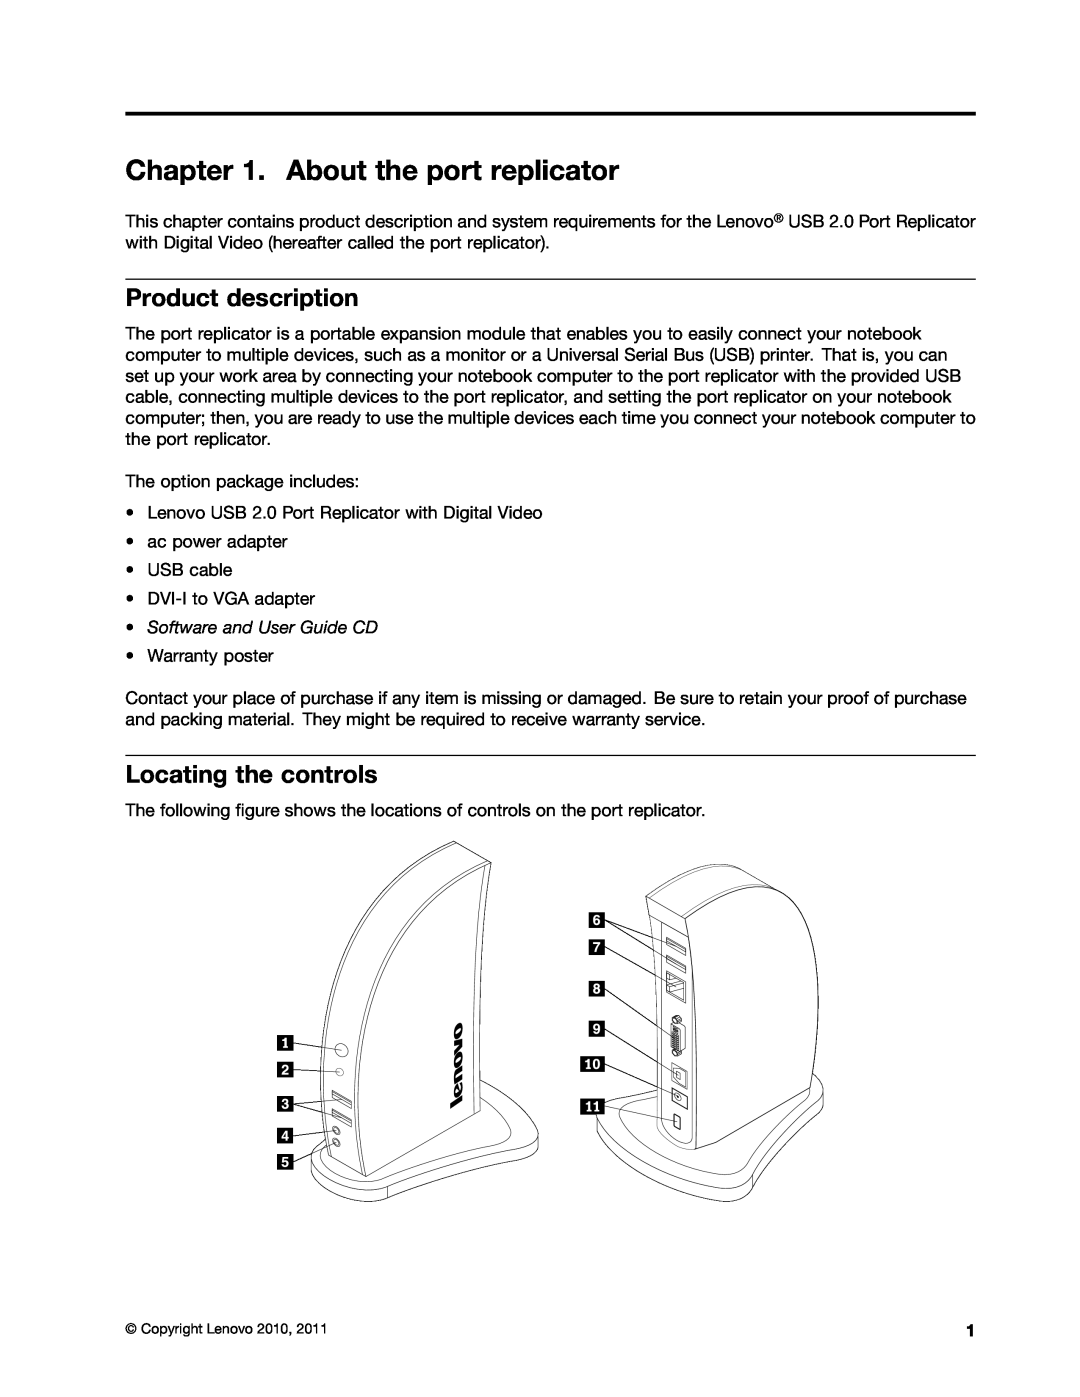 Lenovo 0A33942 manual About the port replicator, Product description, Locating the controls, Software and User Guide CD 